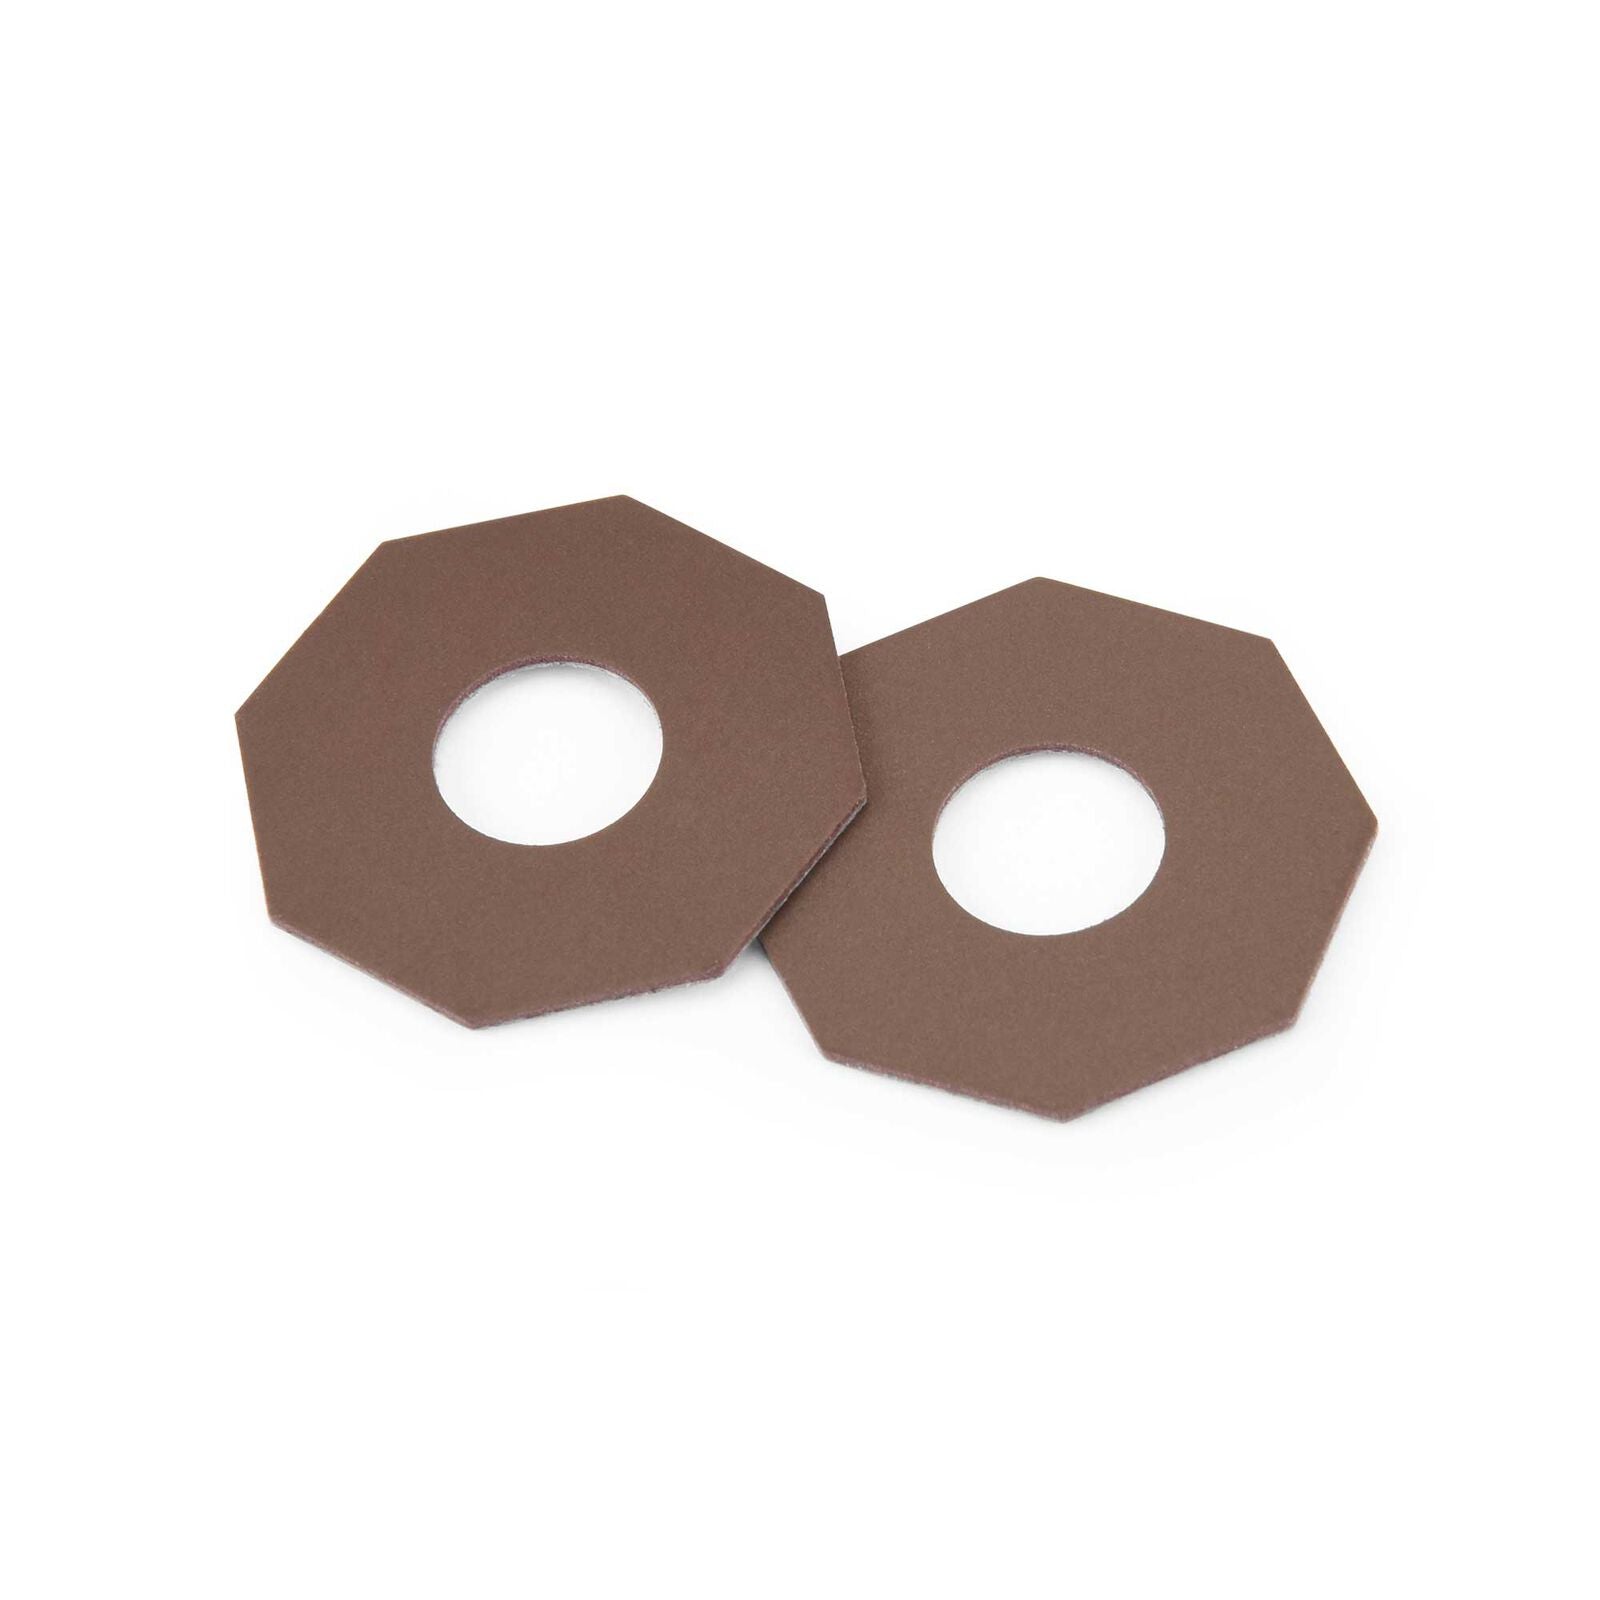 PROLINE 6350-05 Replacement Slipper Pads: PRO-Series 32P Transmission